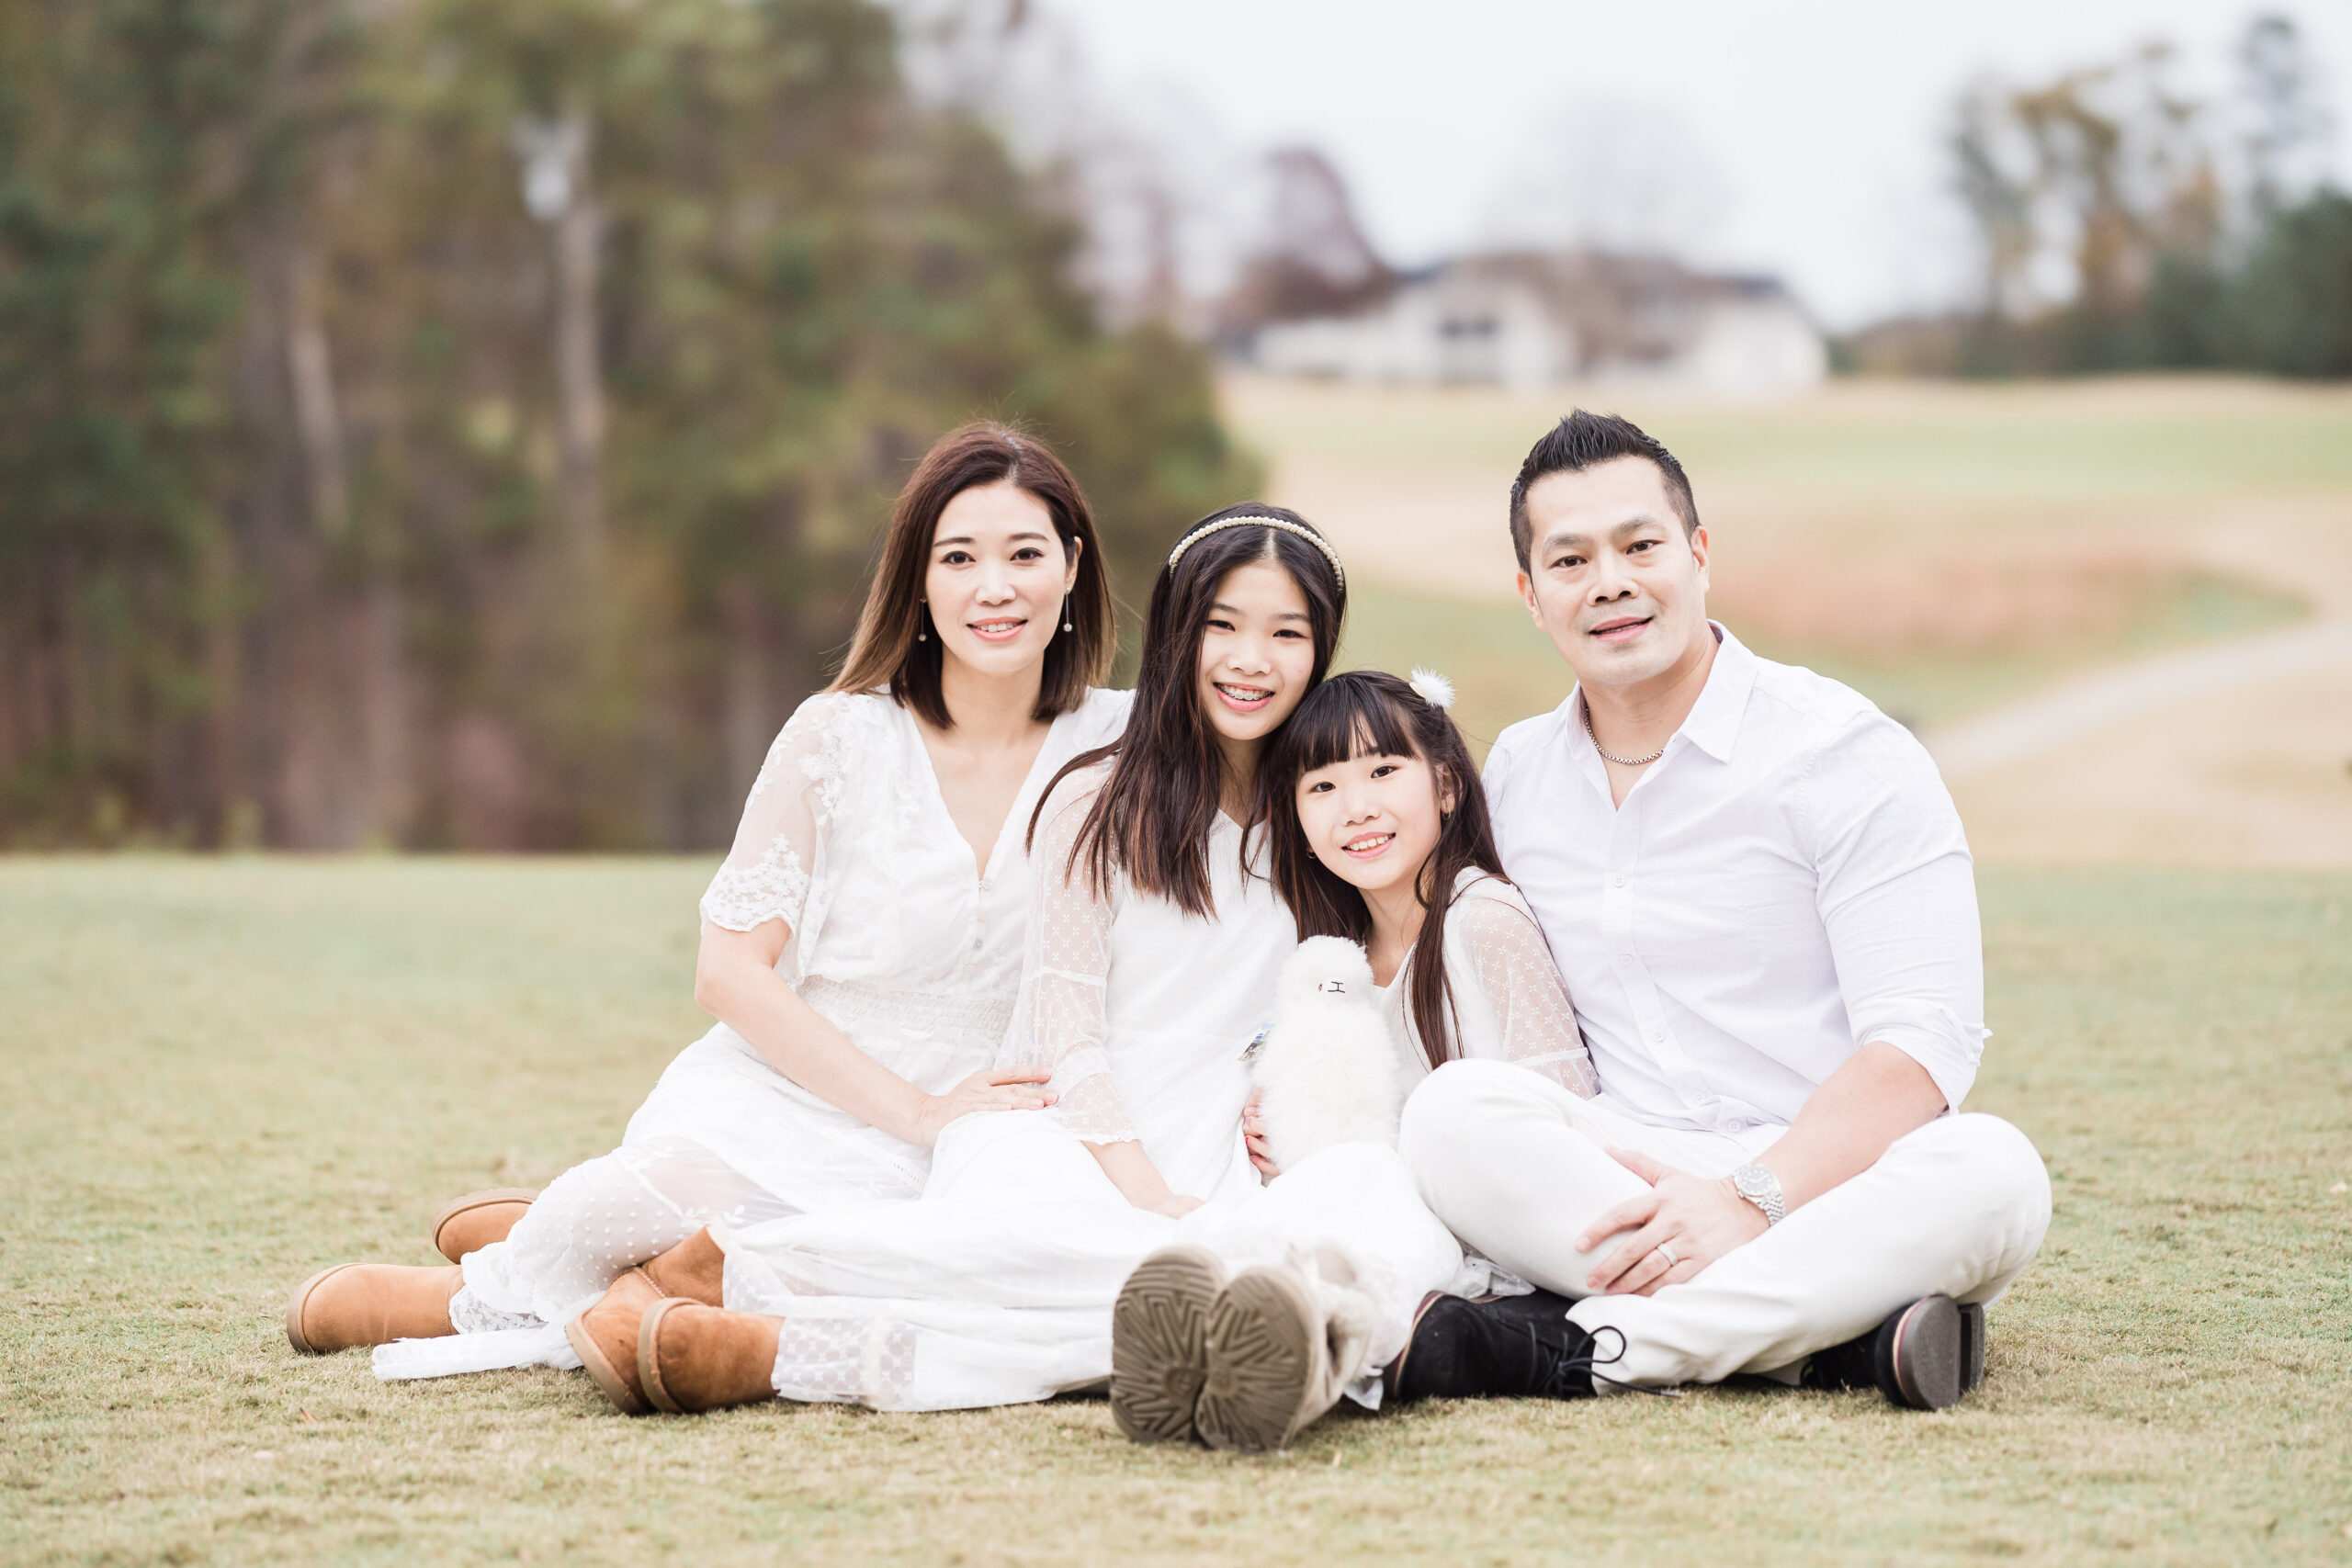 Mom, Dad, and their teo girls in all white sitting in a lawn and smiling at the camera